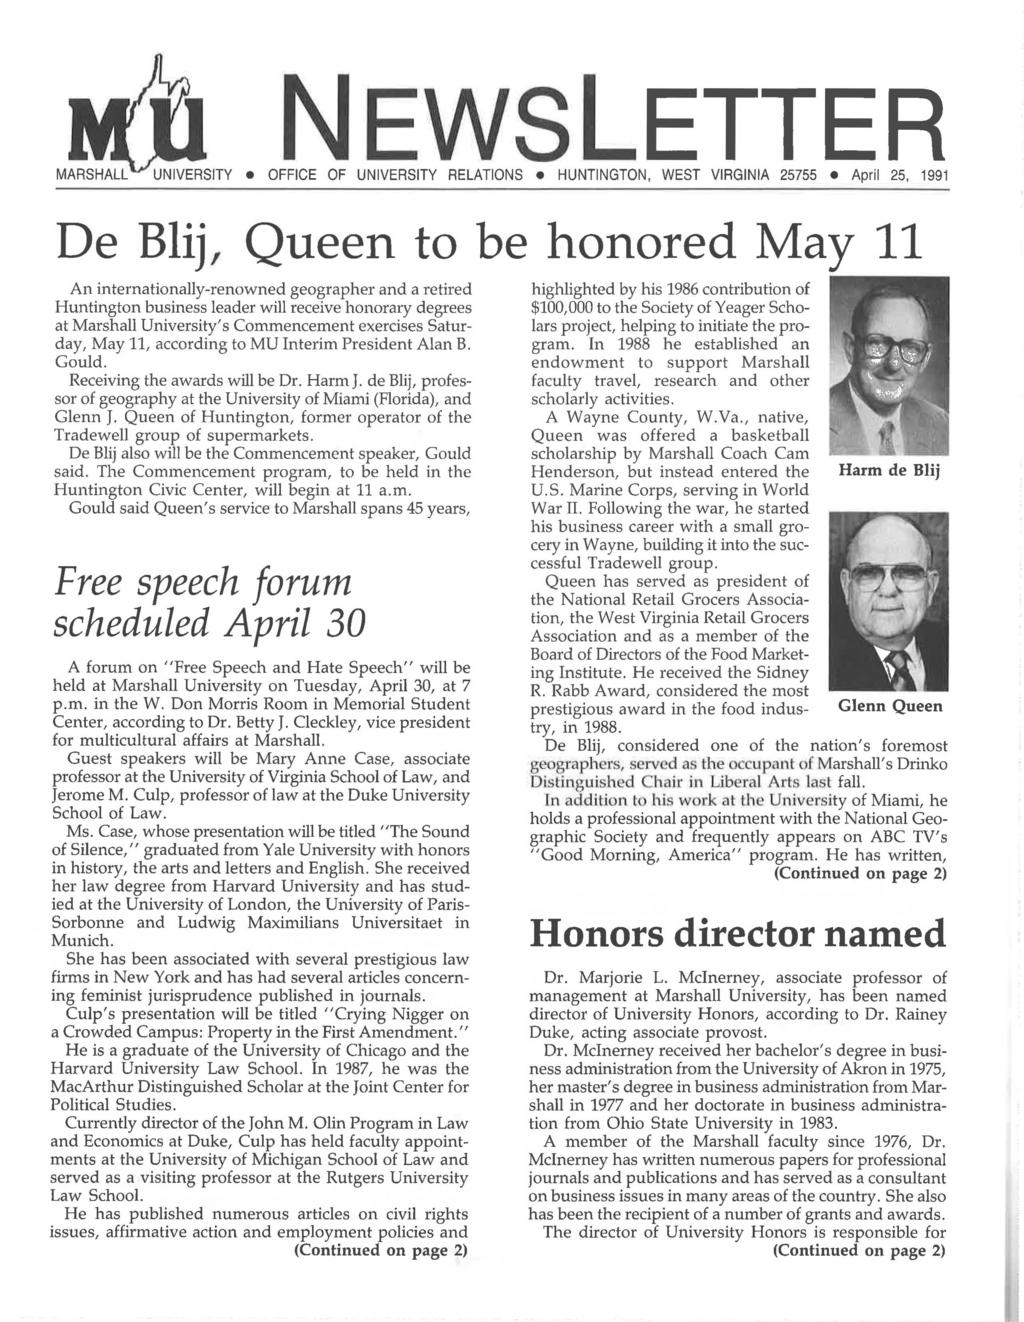 NEWSLETTER OFFICE OF UNIVERSITY RELATIONS HUNTINGTON, WEST VIRGINIA 25755 April 25, 1991 De Blij, Queen to be honored May 11 An internationally-renowned geographer and a retired Huntington business